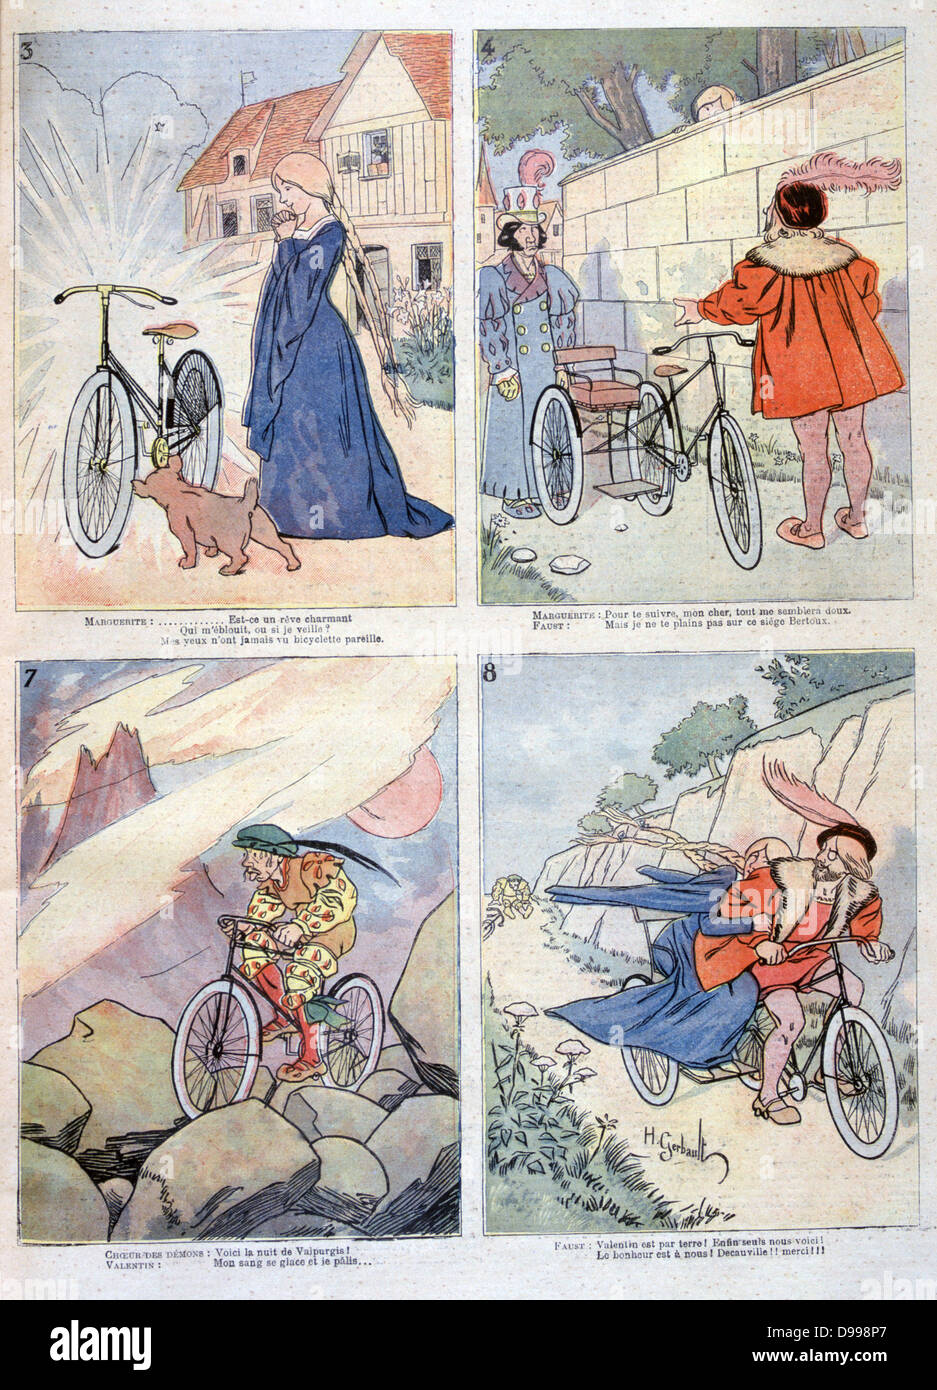 Bicycle applied to the Legend of Faust: From - Temptation by Mephistopheles, A rejuvinated Strauss courting Marguerite, To Faust and Marguerite escaping on tricycle. From 'Le Petit Journal',  Paris, 2 April 1894. (also 0510007480). Stock Photo